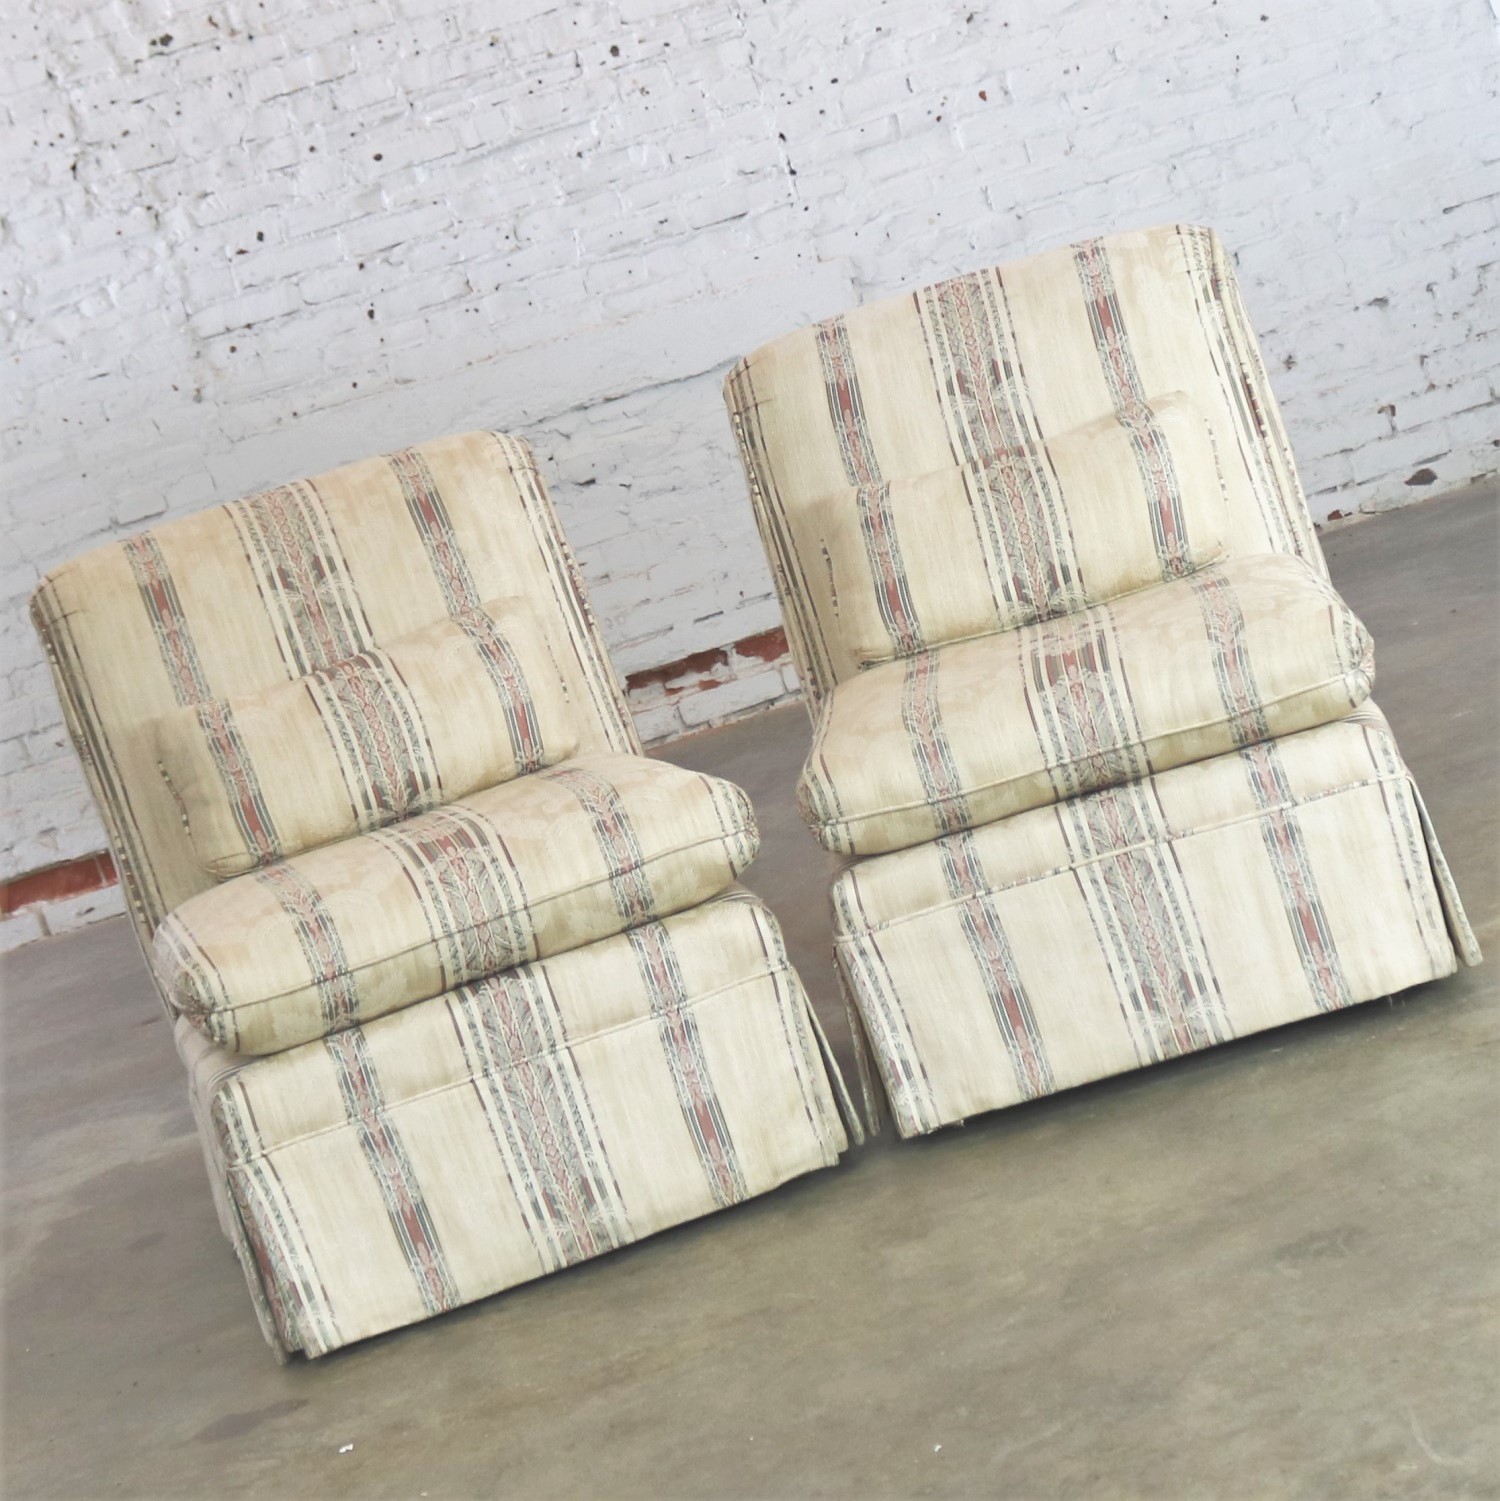 Striped Slipper Roll Back Chairs a Vintage Pair